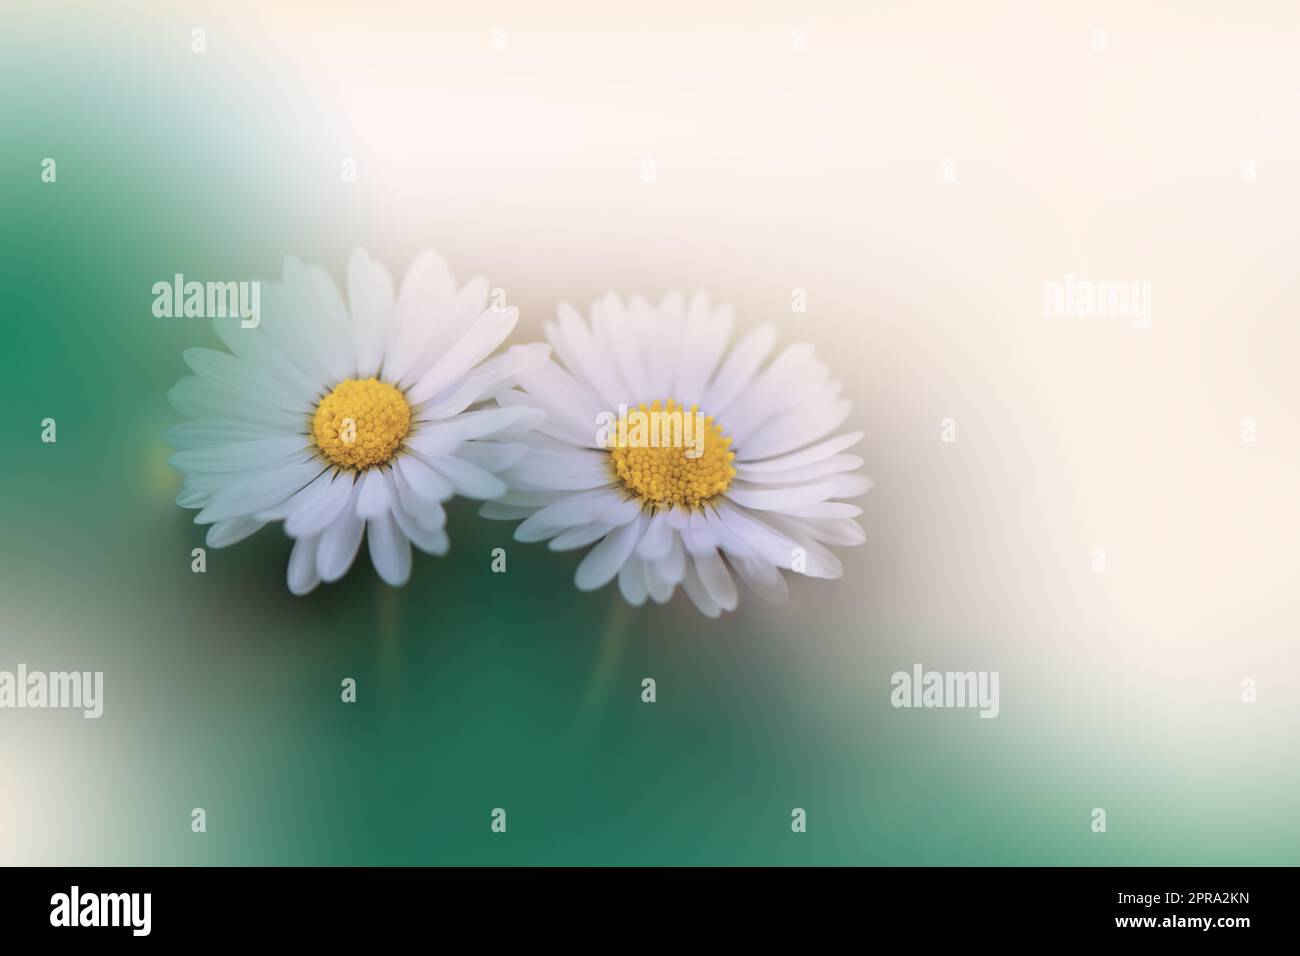 Beautiful Nature Background.Floral Art Design.Abstract Macro Photography.White Daisy Flower.Soft Focus.Pastel Flowers.Green Background.Creative Artistic Wallpaper.Wedding Invitation.Celebration,love.Close up View.Happy Holidays.White Color.Copy Space. Stock Photo